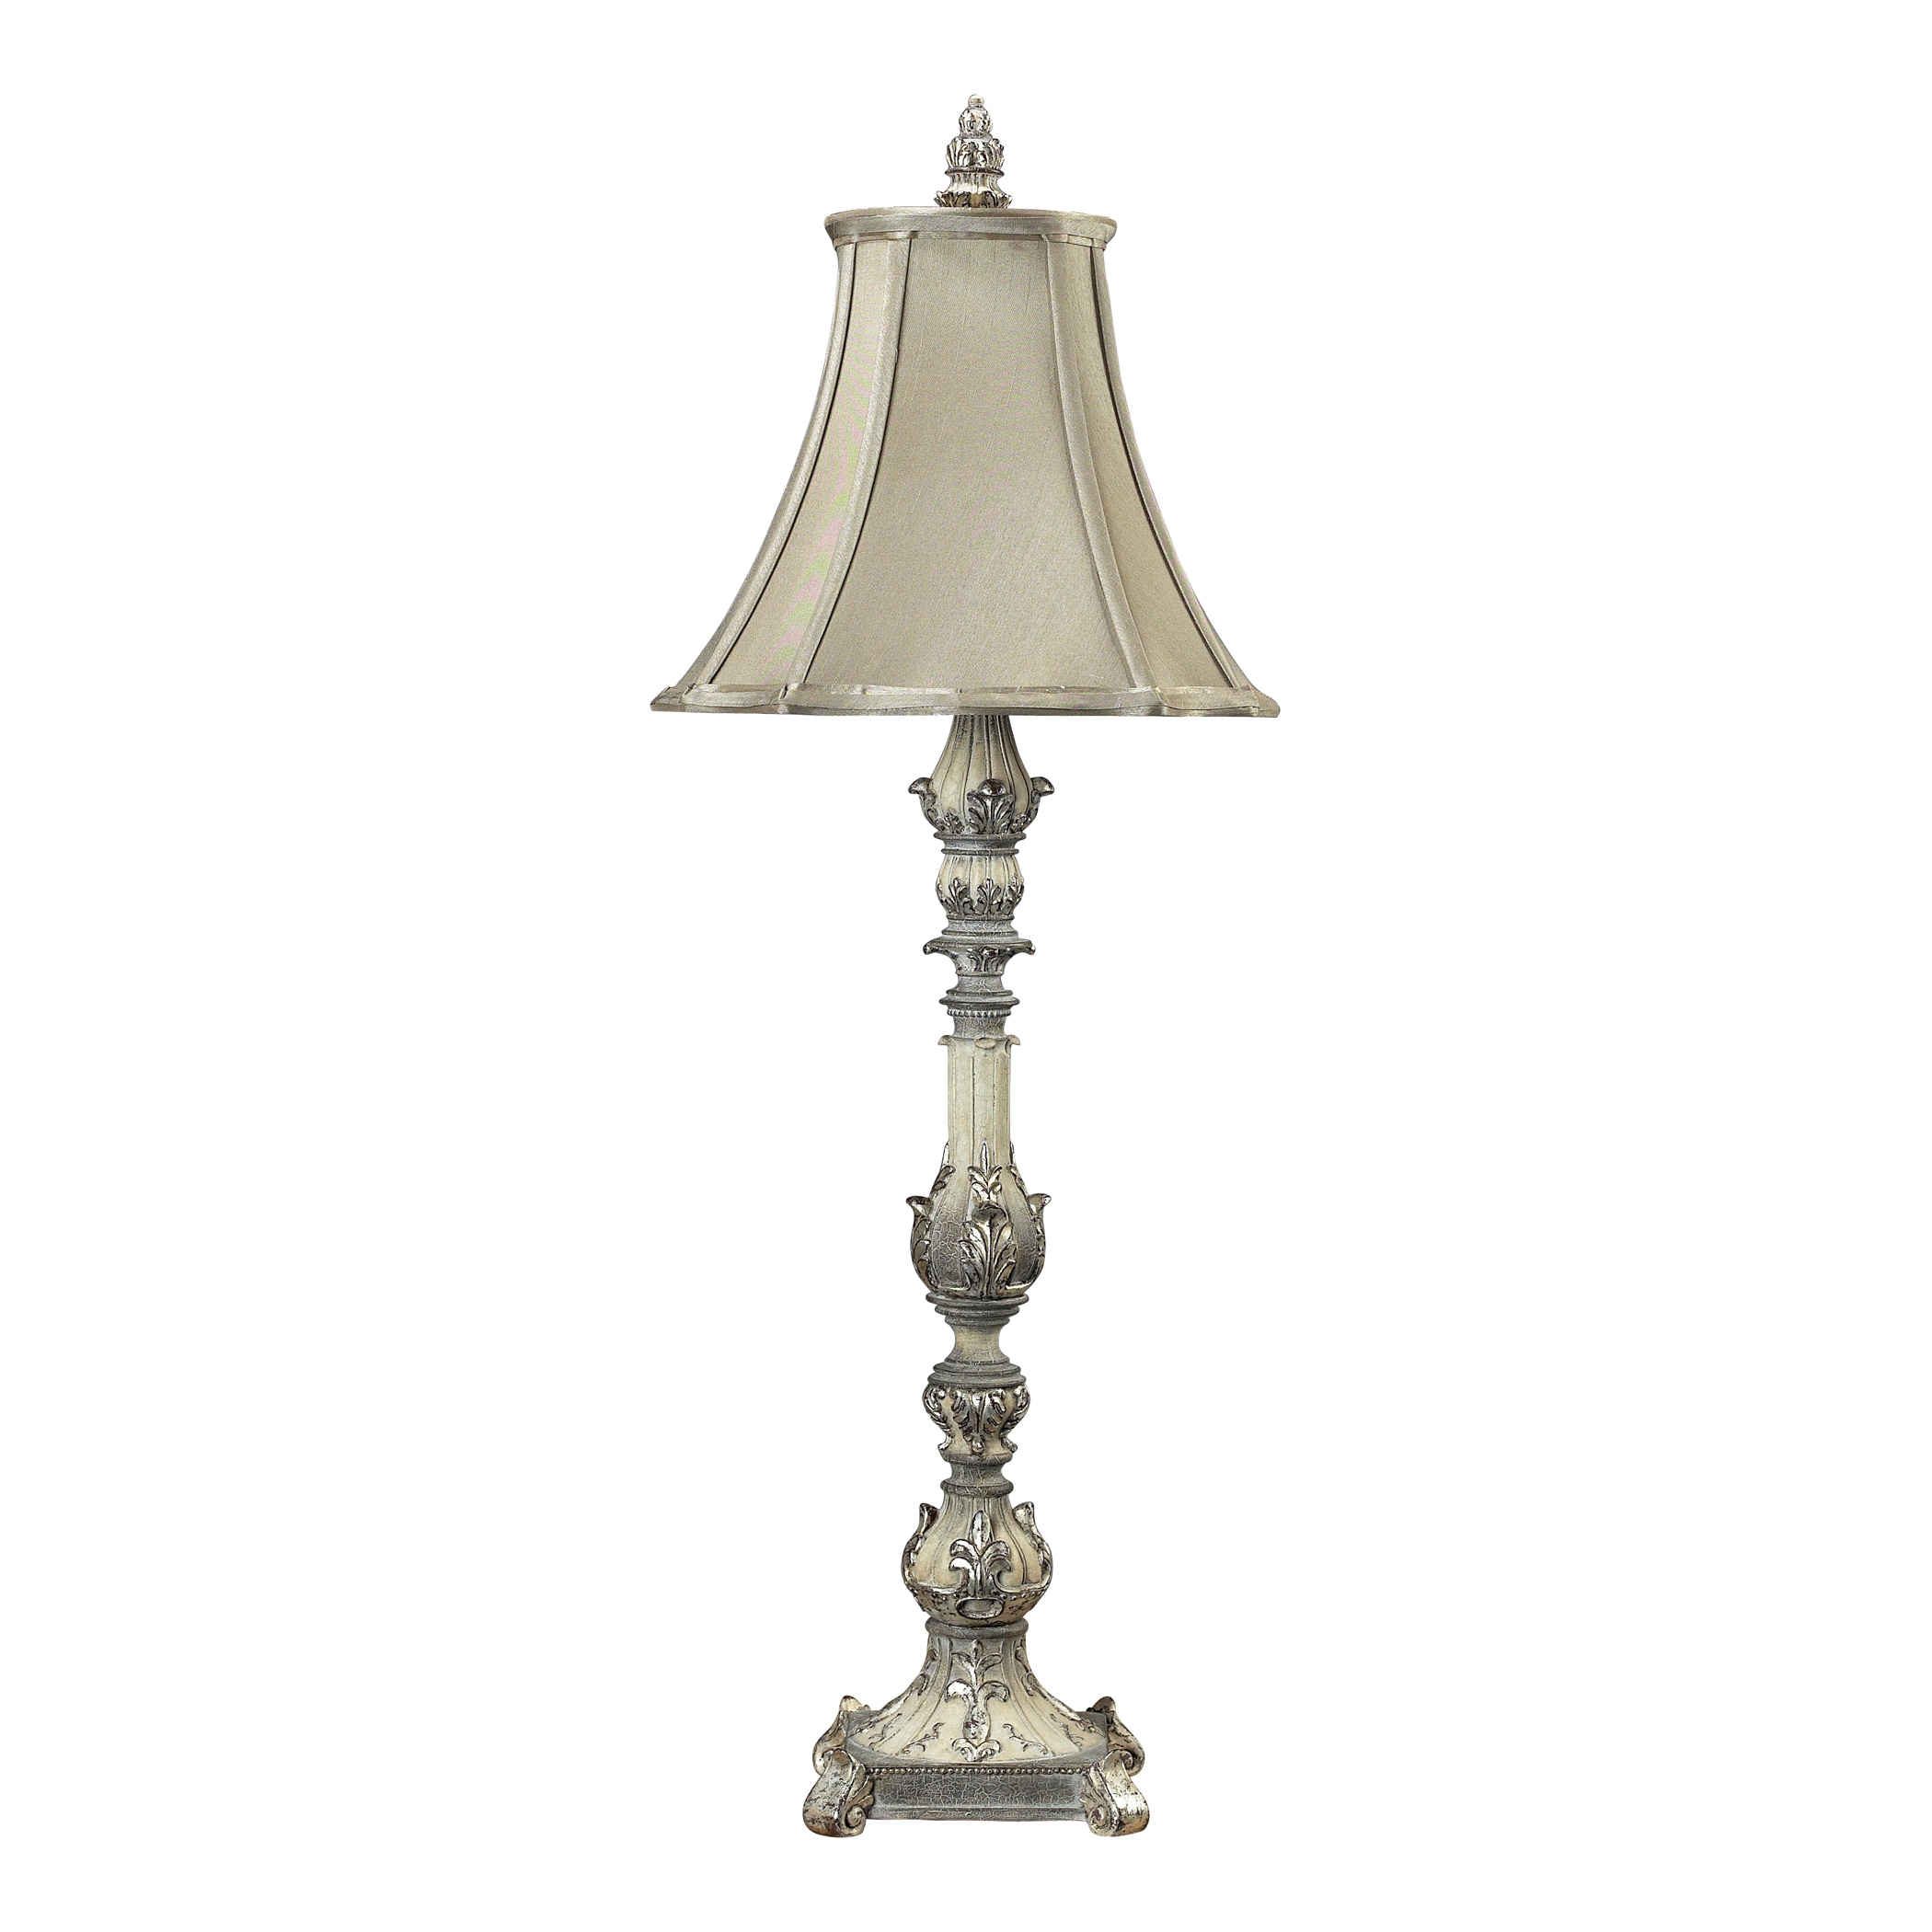 Dimond Lighting Imperial Silver Finish Table Lamp